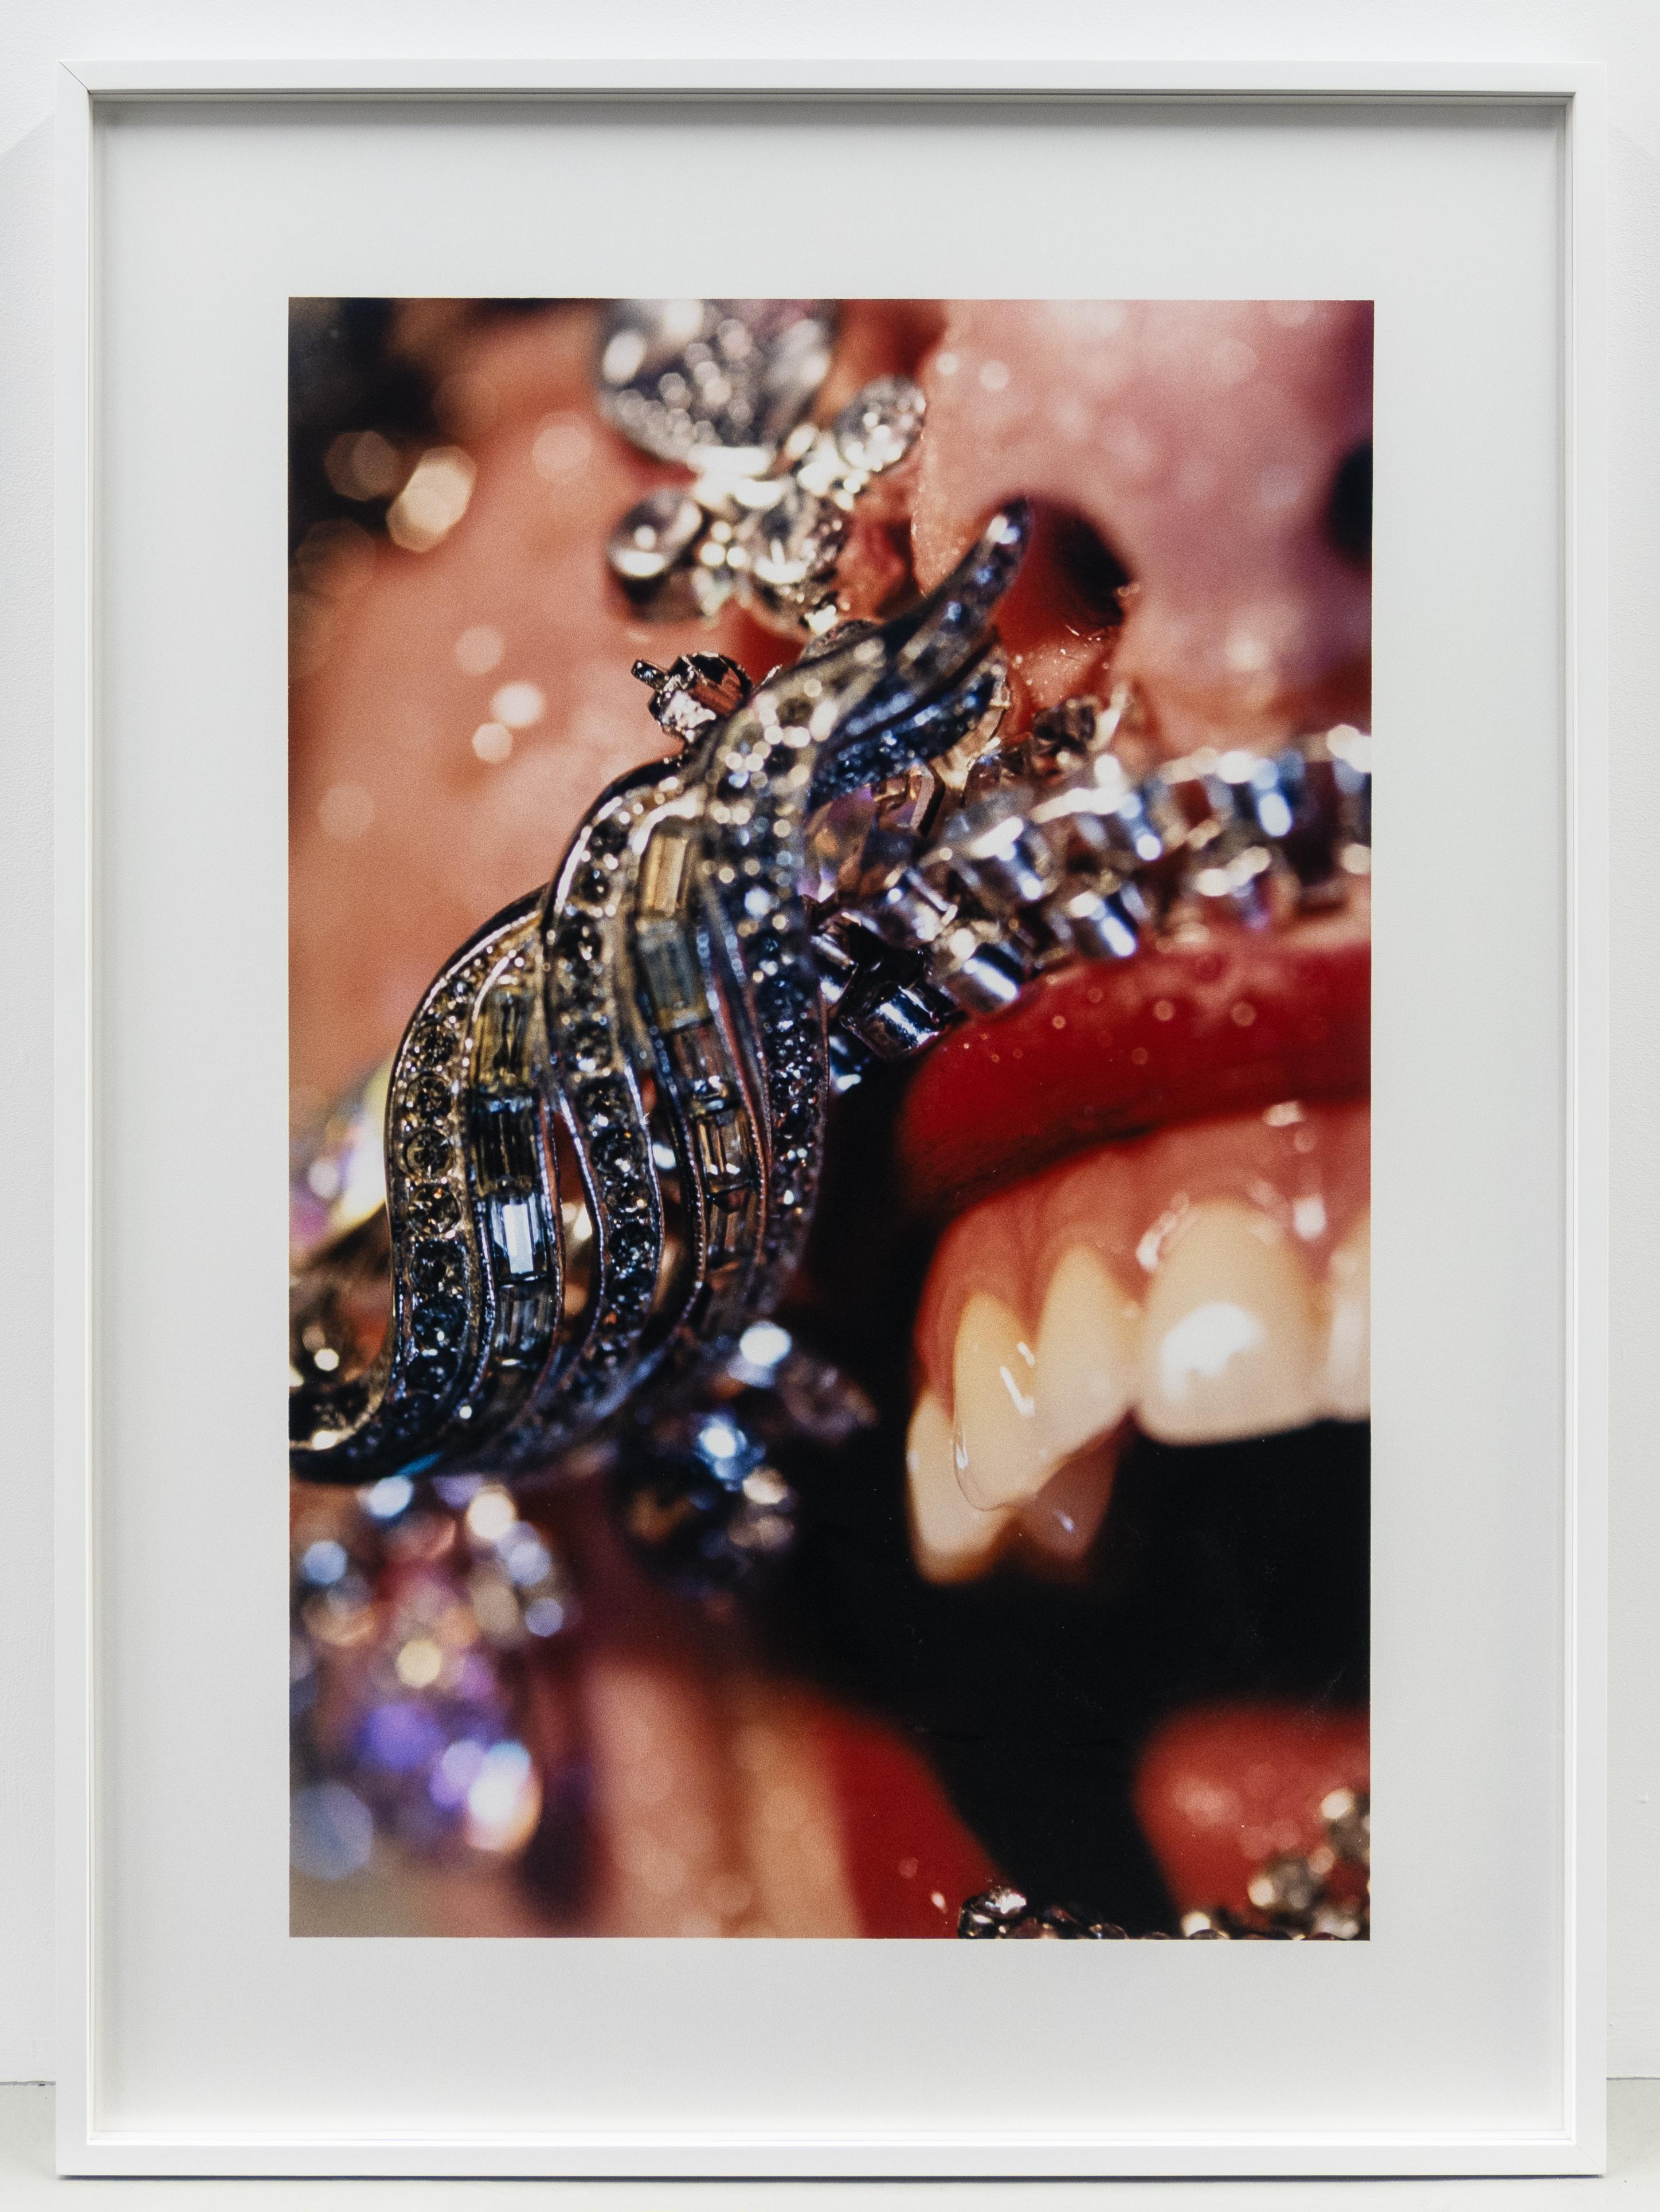 Brooch - Photograph by Marilyn Minter